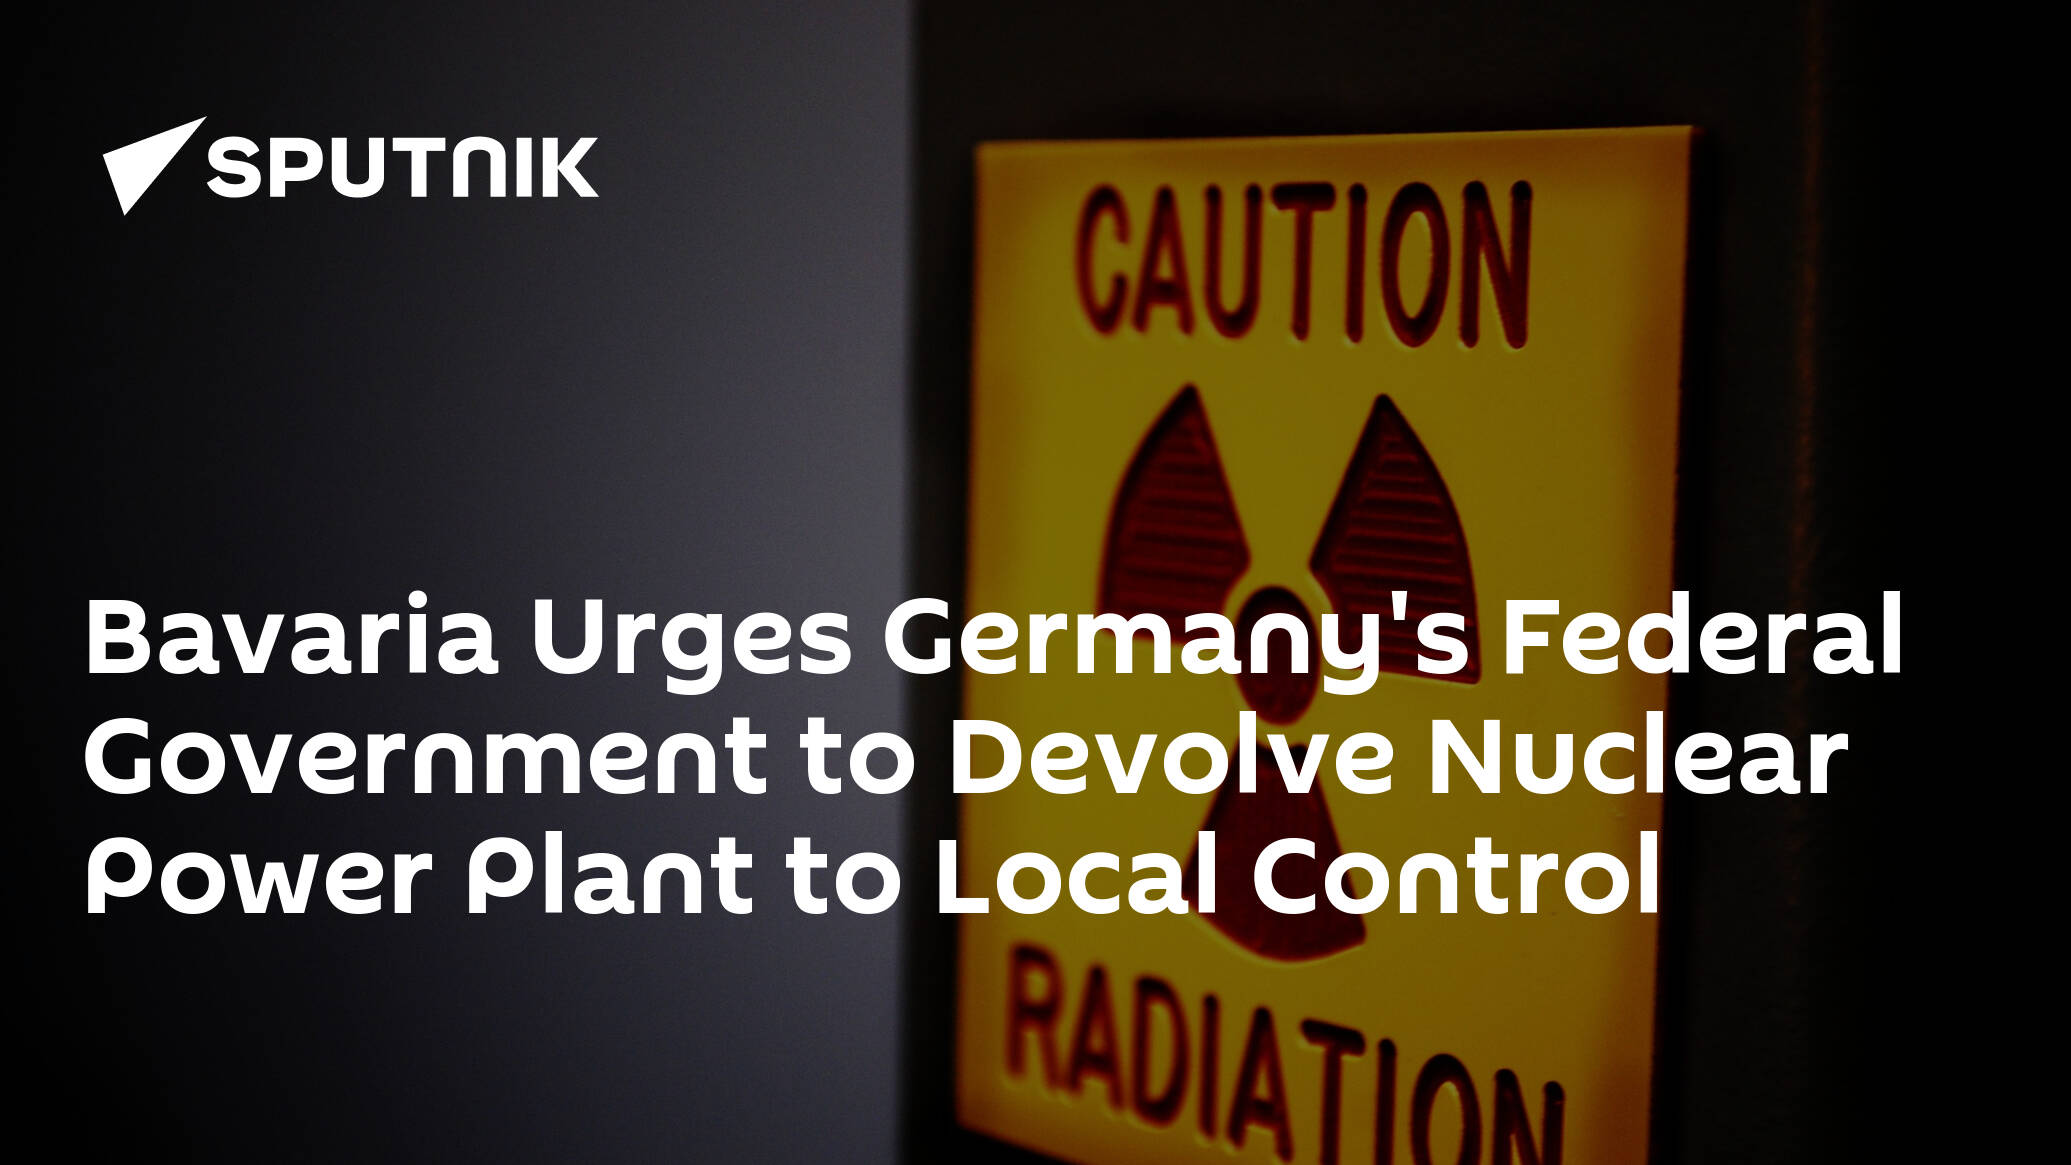 Bavaria Urges Germany's Federal Government to Devolve Nuclear Power Plant to Local Control